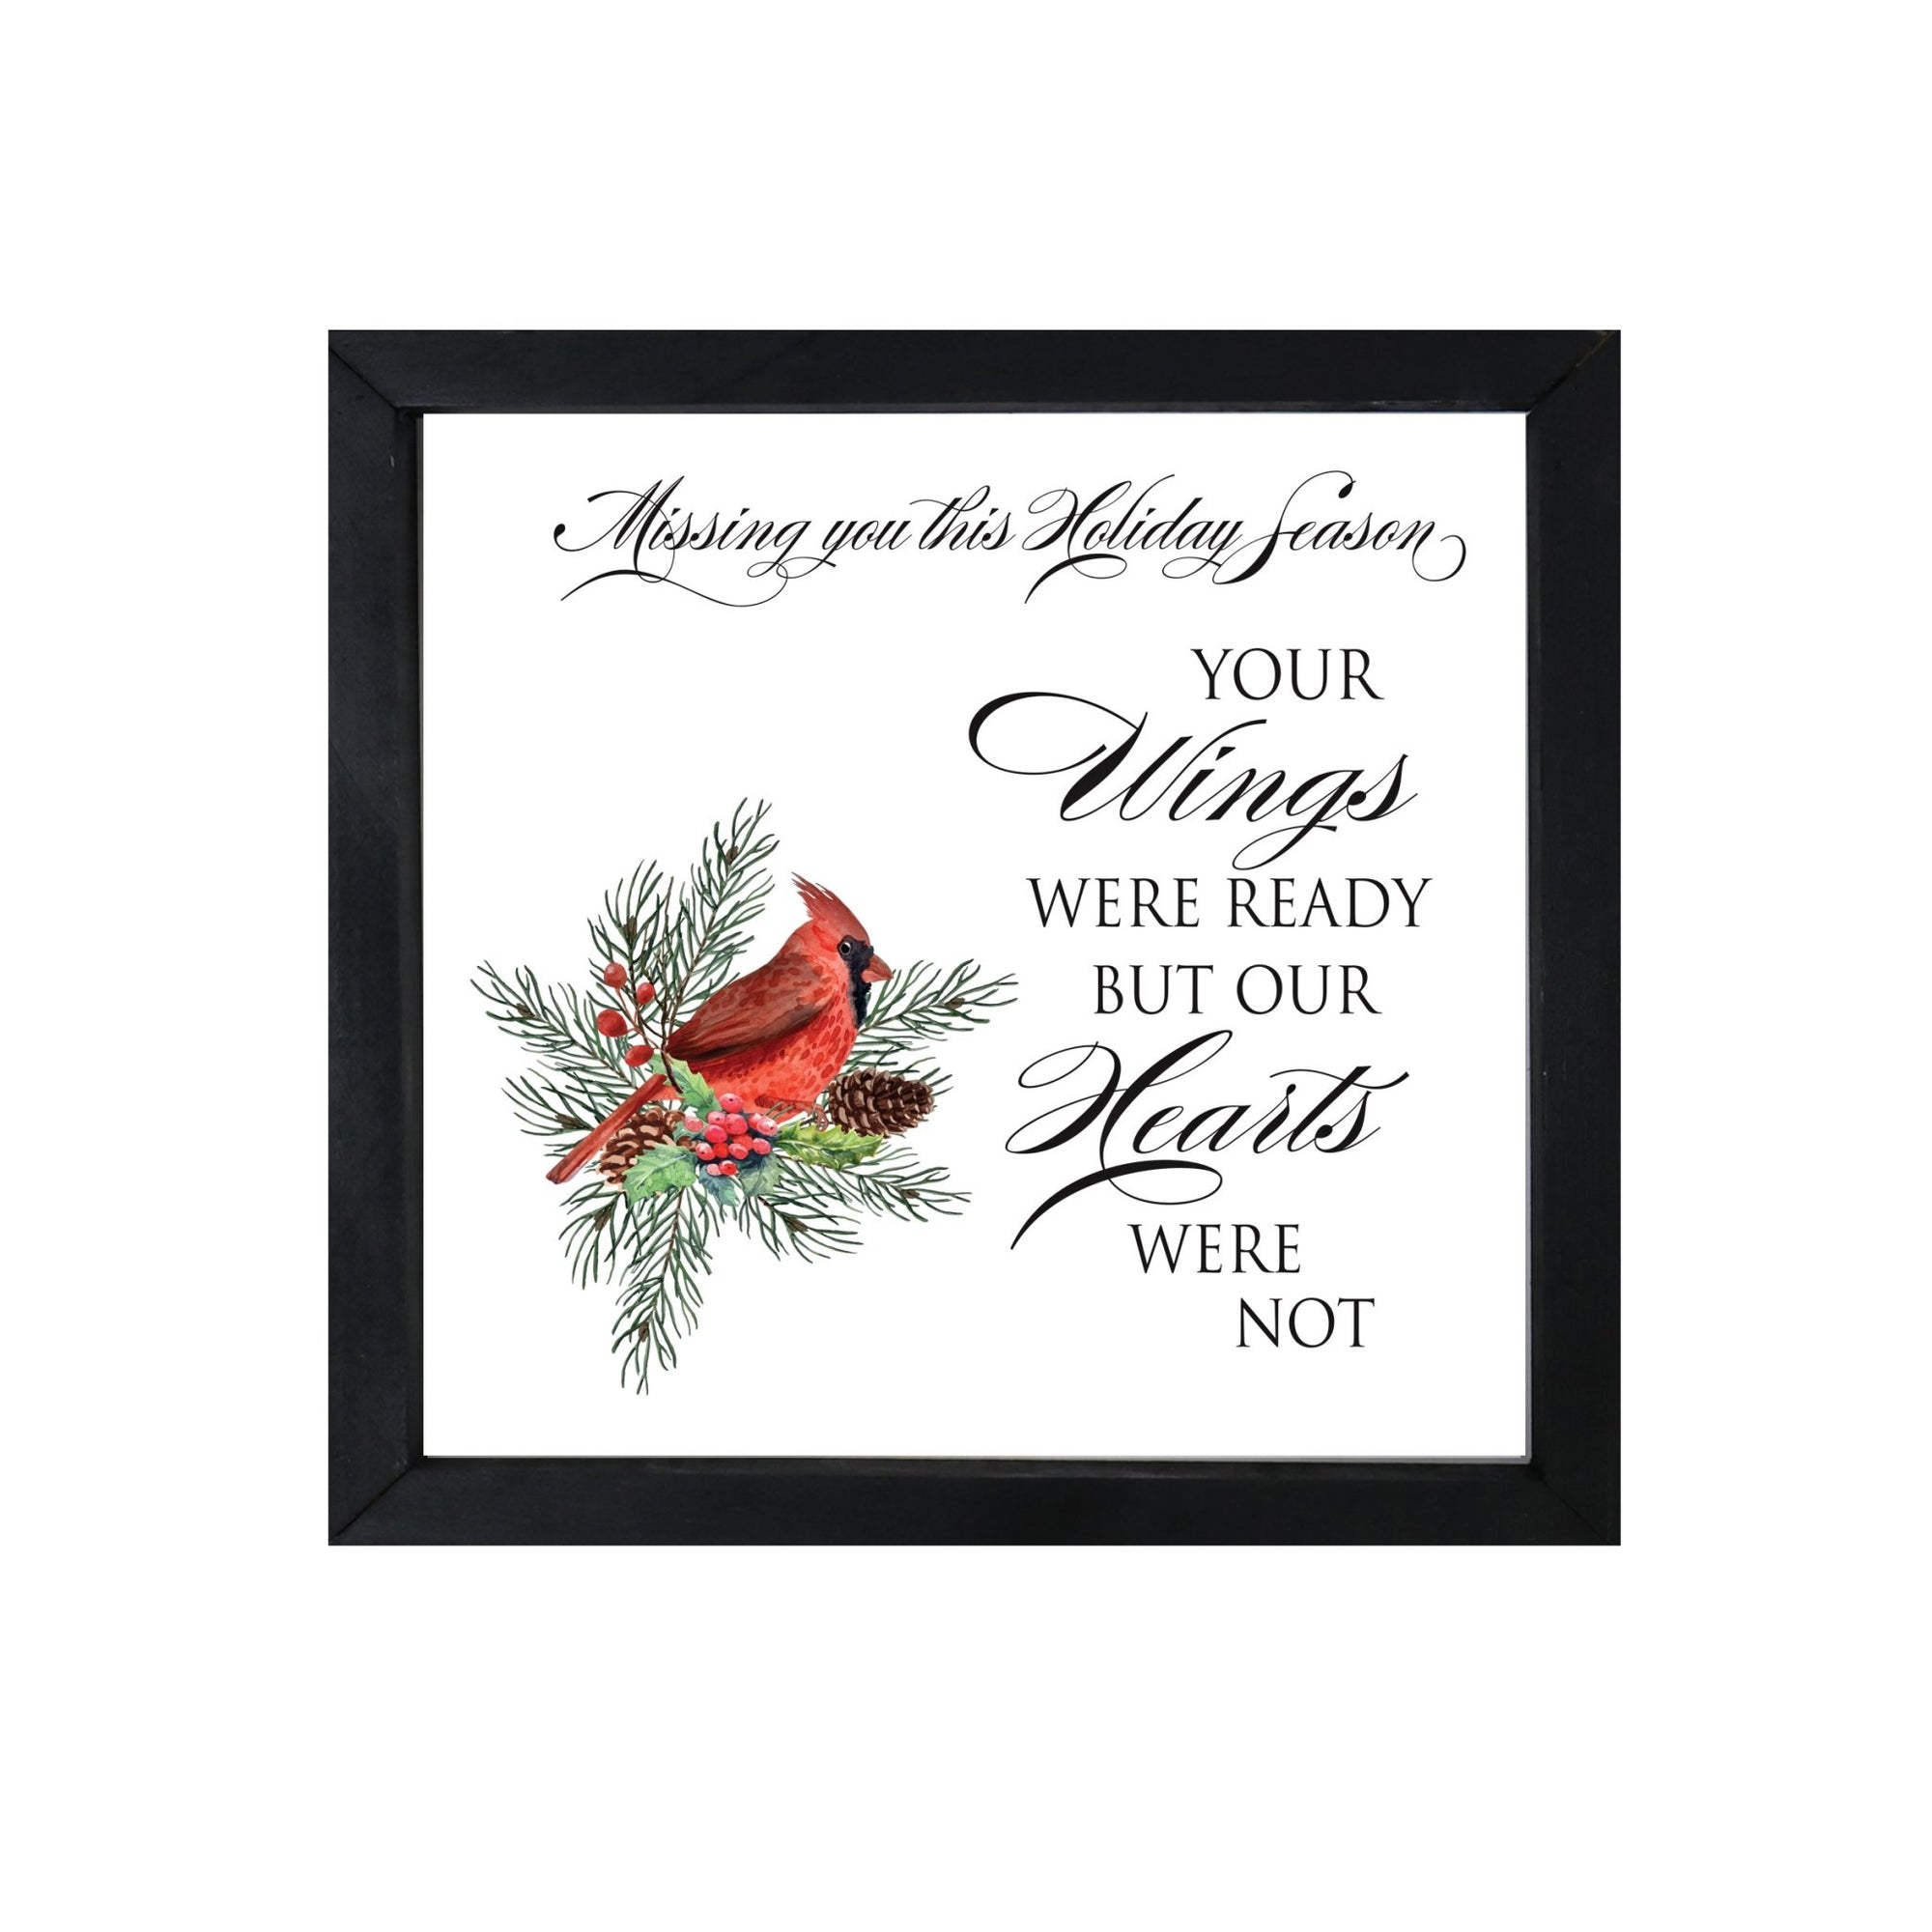 Christmas Memorial Cardinal Shelf Décor - Your Wings Were Ready - LifeSong Milestones